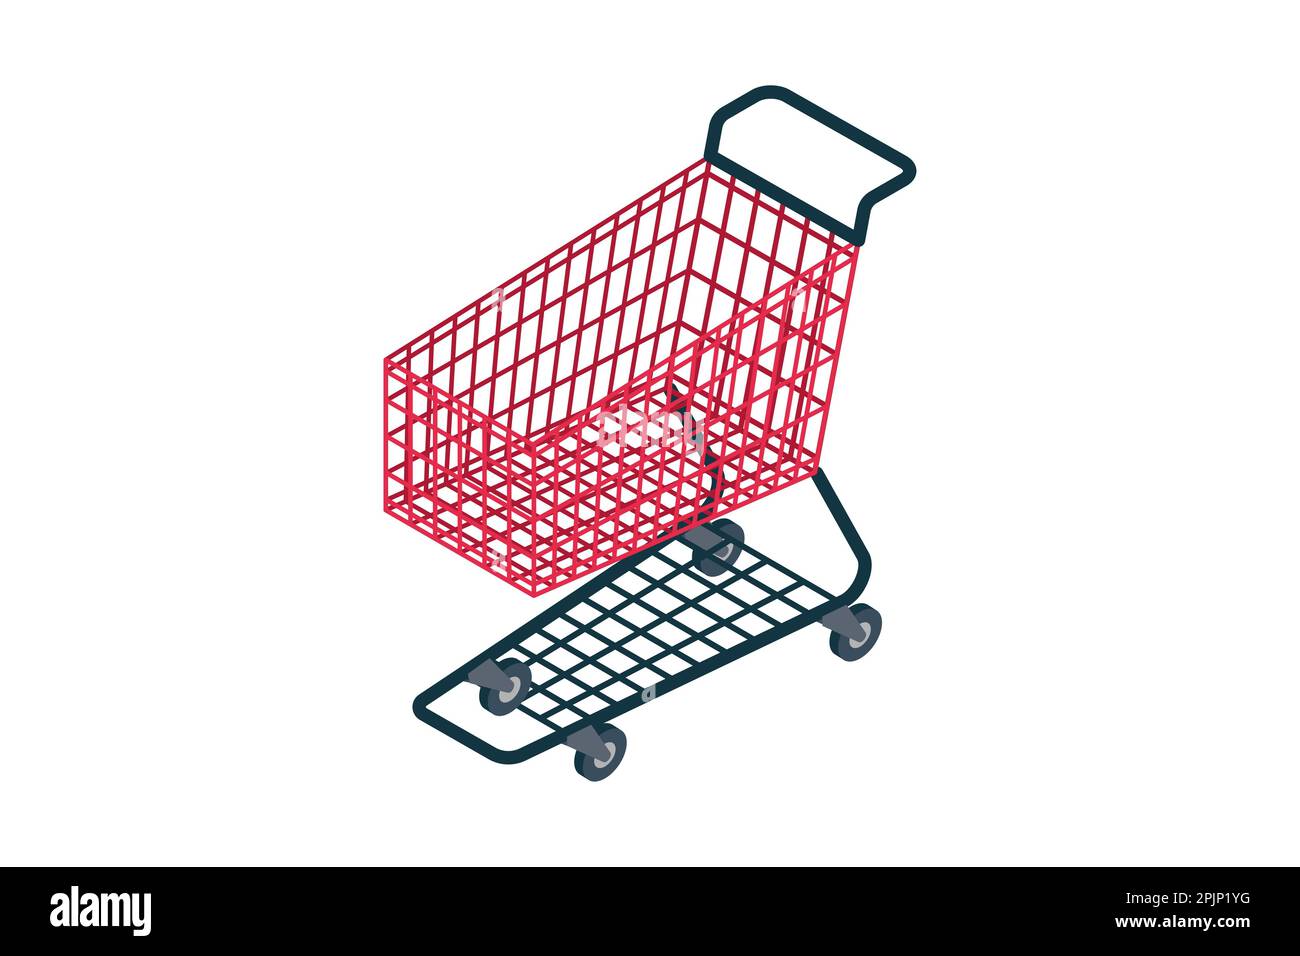 Isometric wire shopping cart. Empty red colored pushcart or shopping cart on isolated background. Isometric trolley cart. Vector illustration Stock Vector